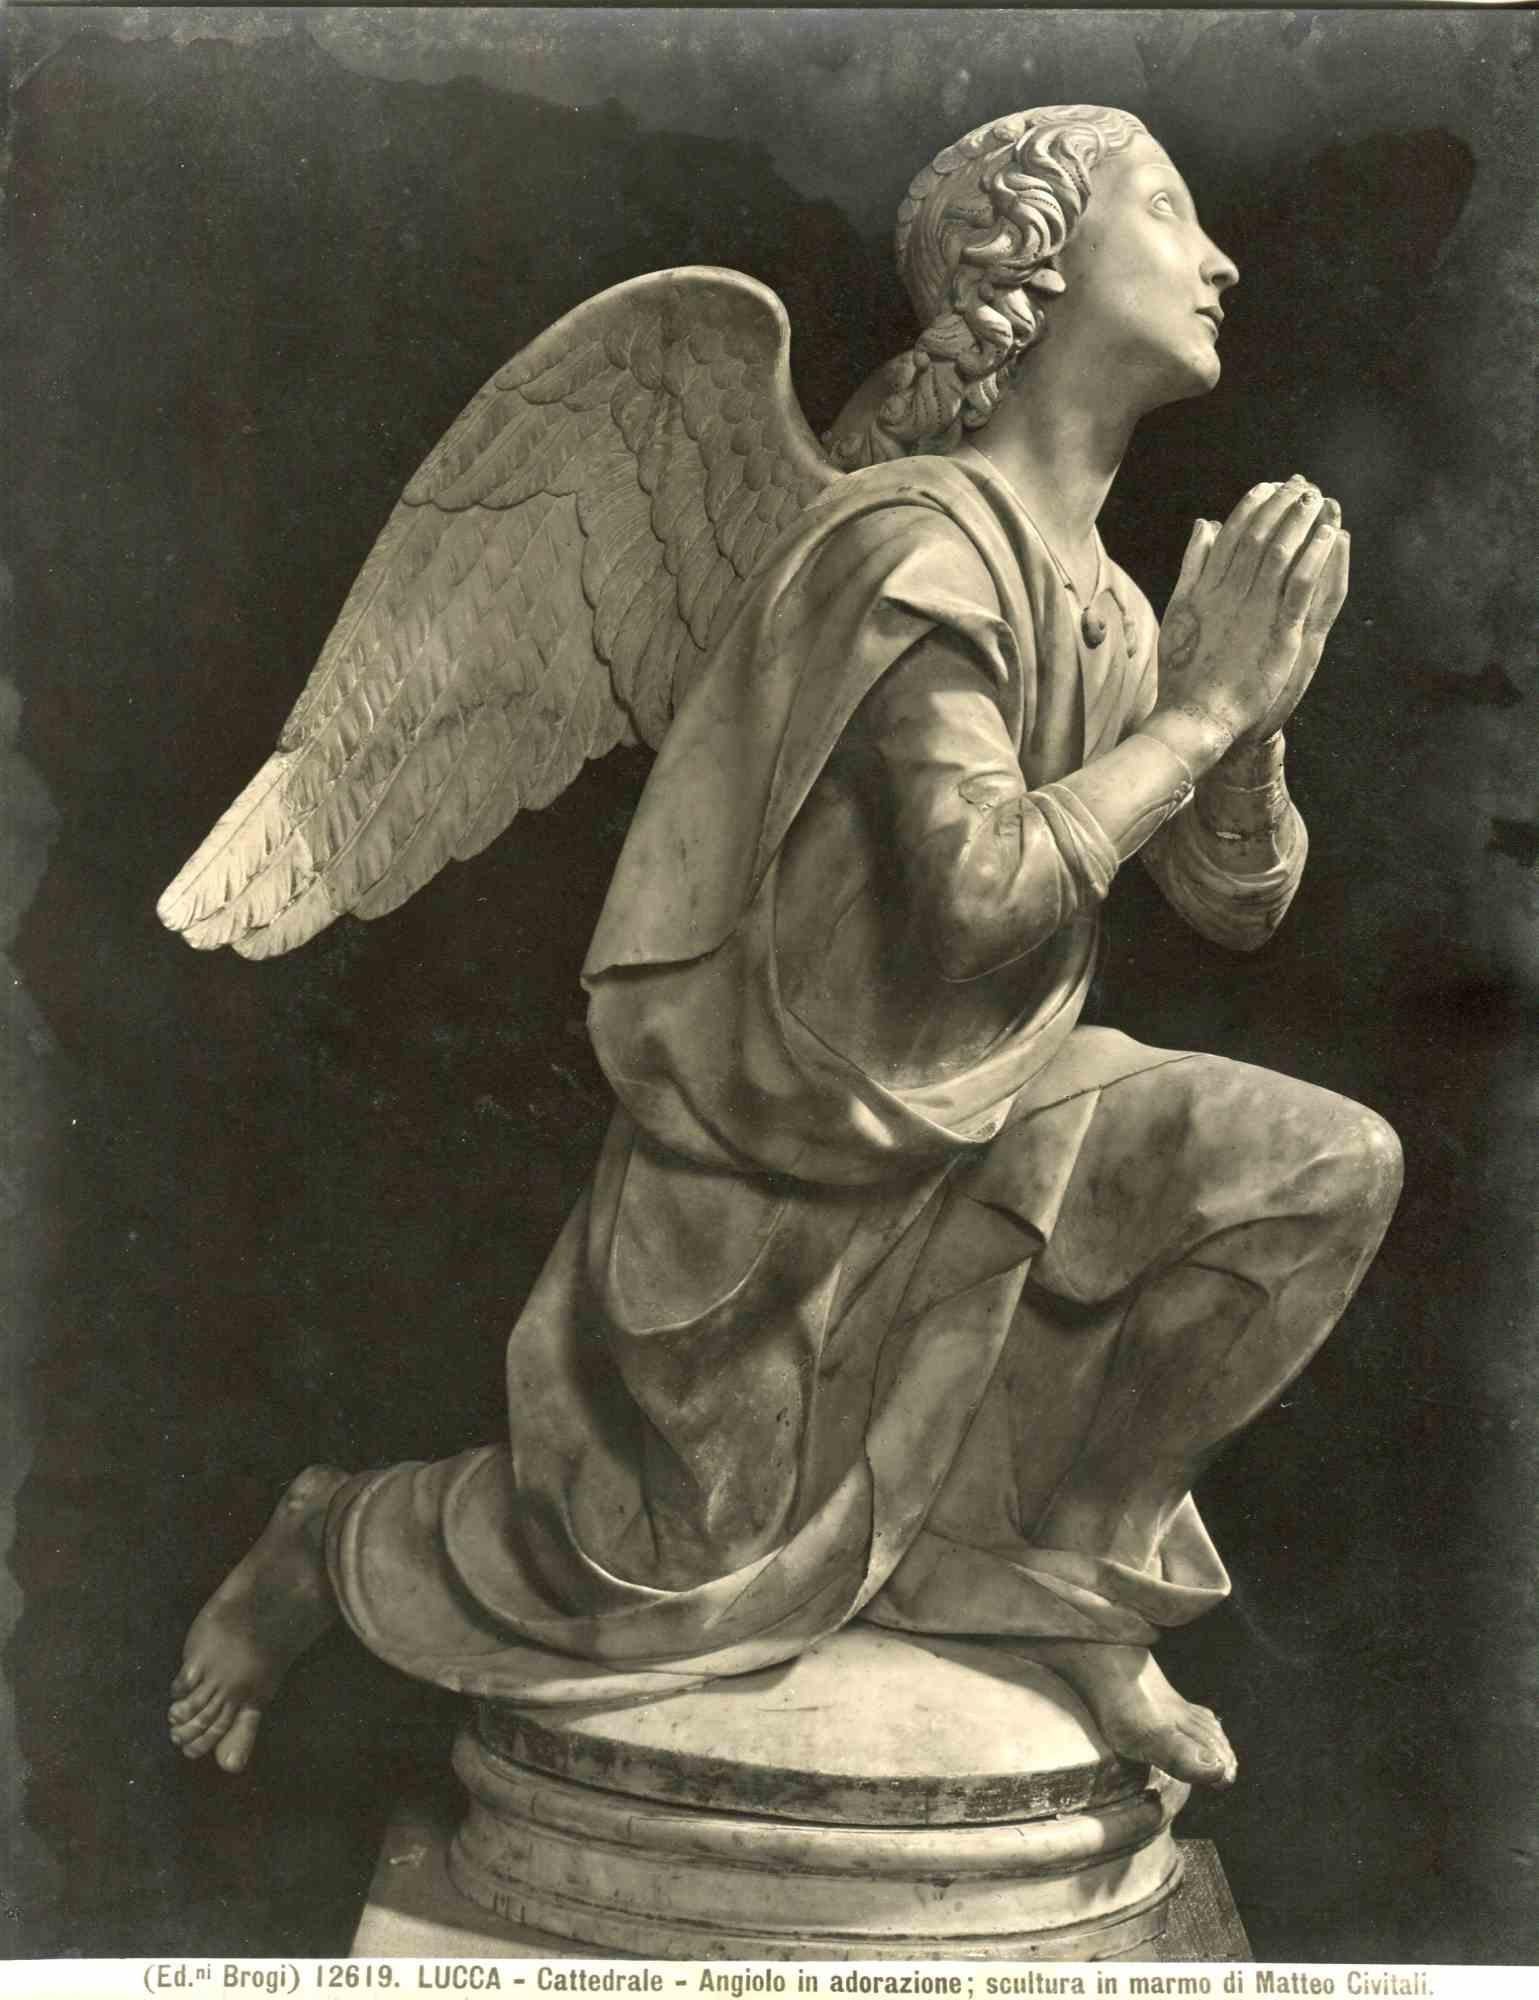 Unknown Figurative Photograph - Angel in Adoration - Vintage B/w Photograph - Early 20th Century